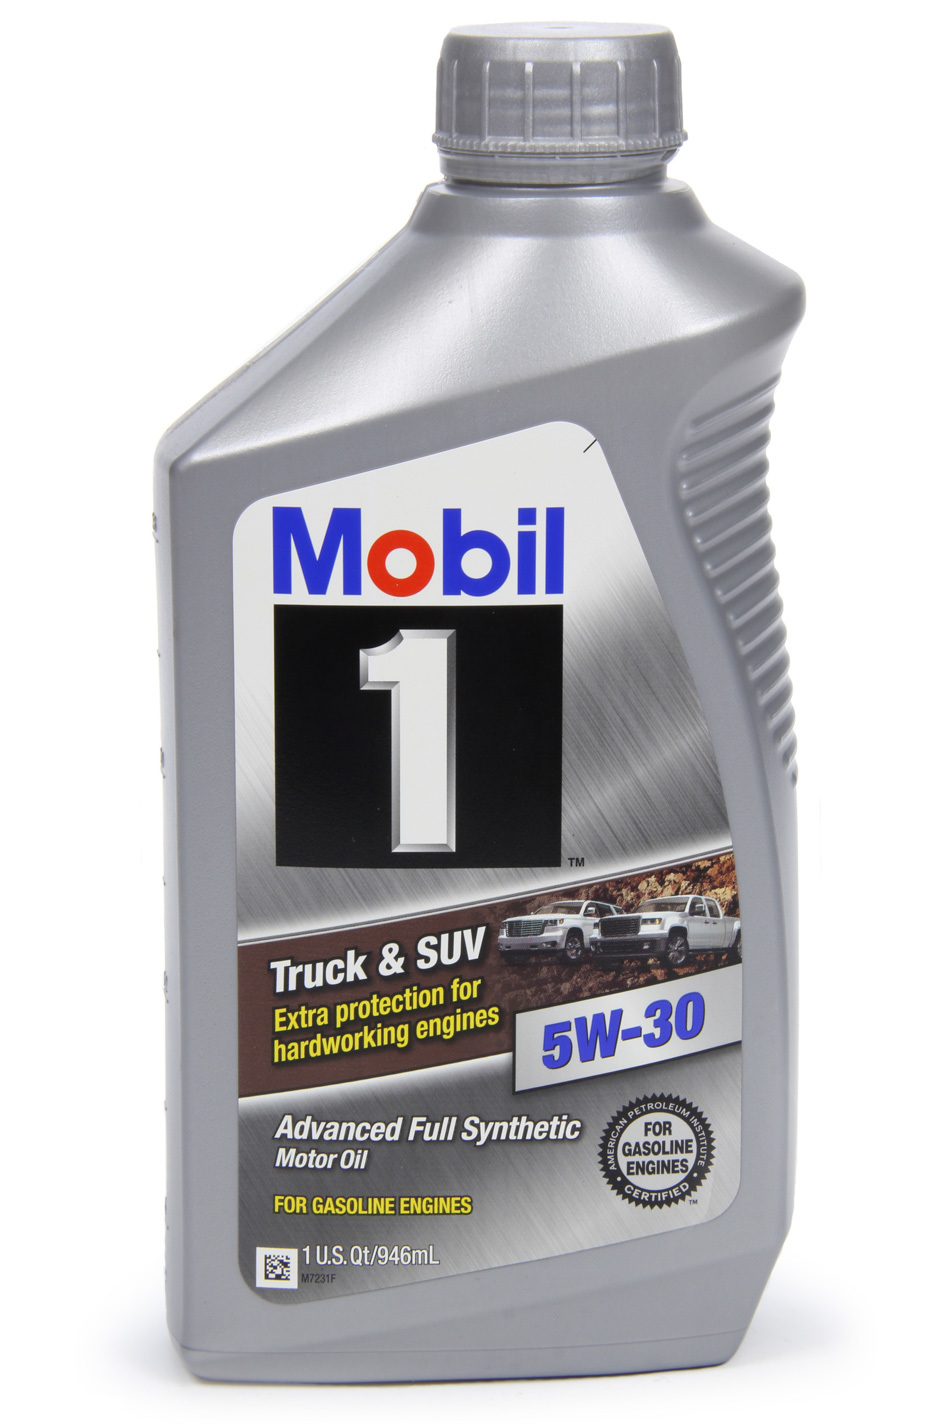 MOBIL 1 Motor Oil Truck and SUV 5W30 Synthetic 1 qt Bottle Each